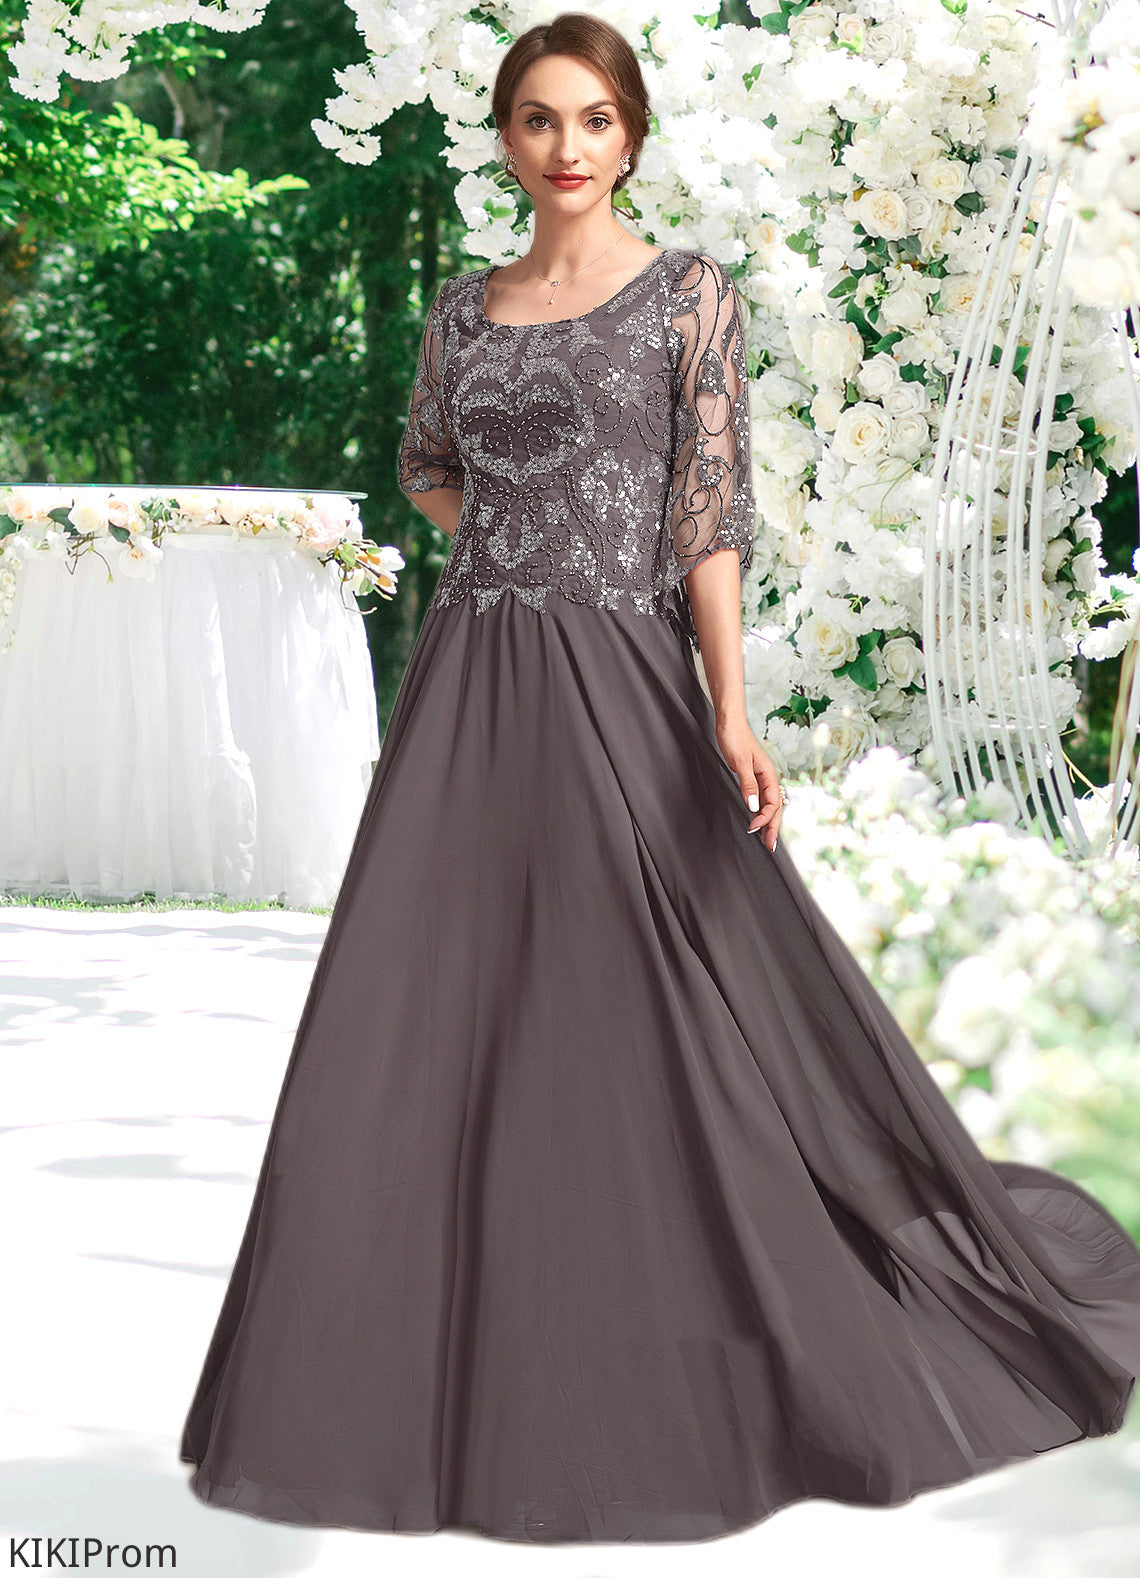 Shyla A-Line Scoop Neck Floor-Length Chiffon Lace Mother of the Bride Dress With Beading Sequins DZ126P0015036